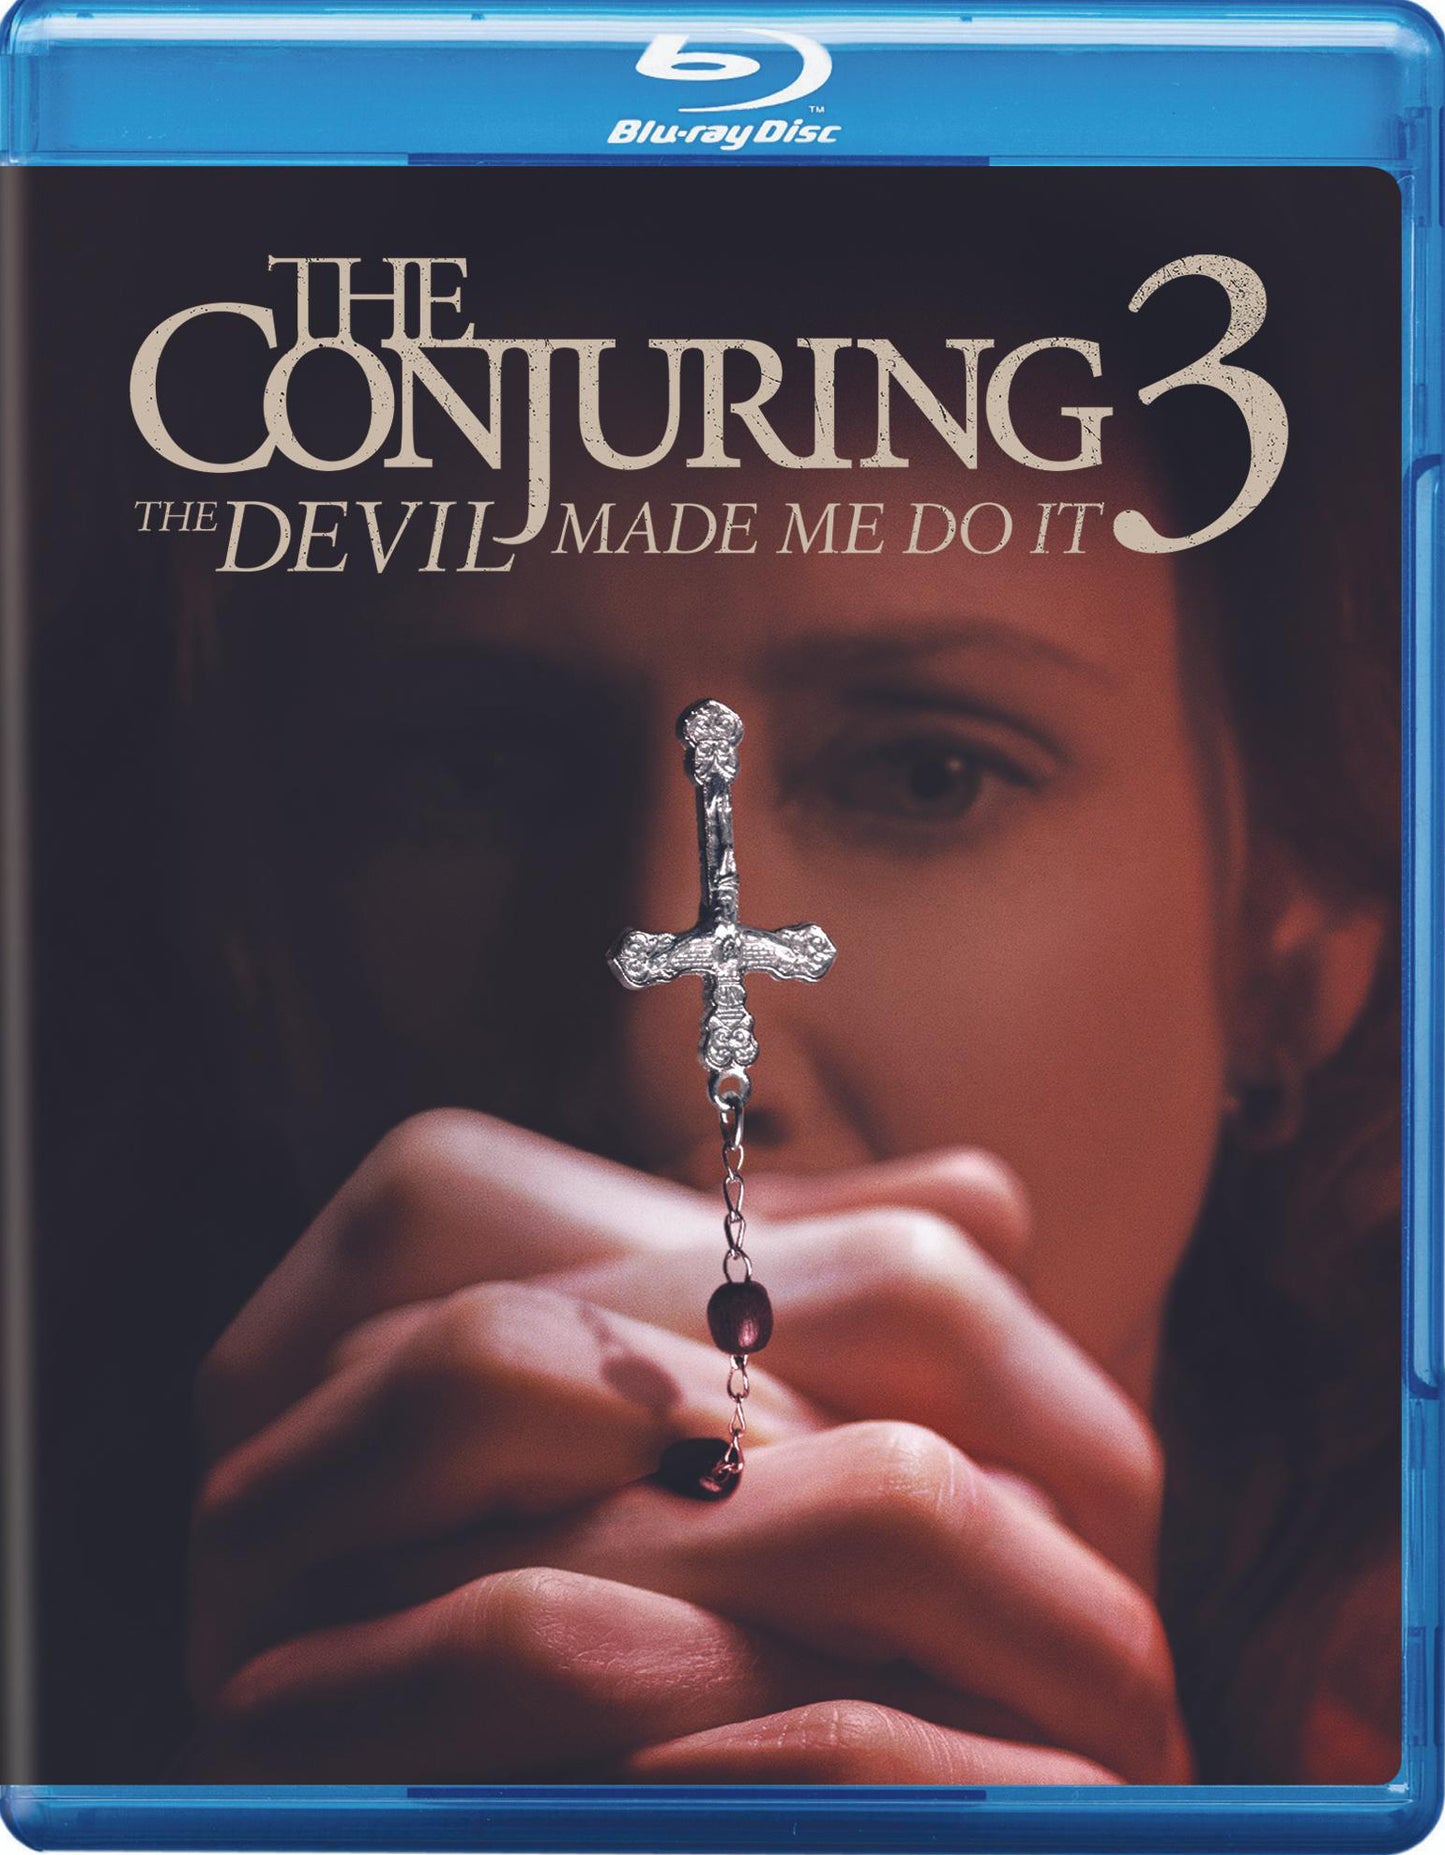 Conjuring: The Devil Made Me Do It [Blu-ray] cover art